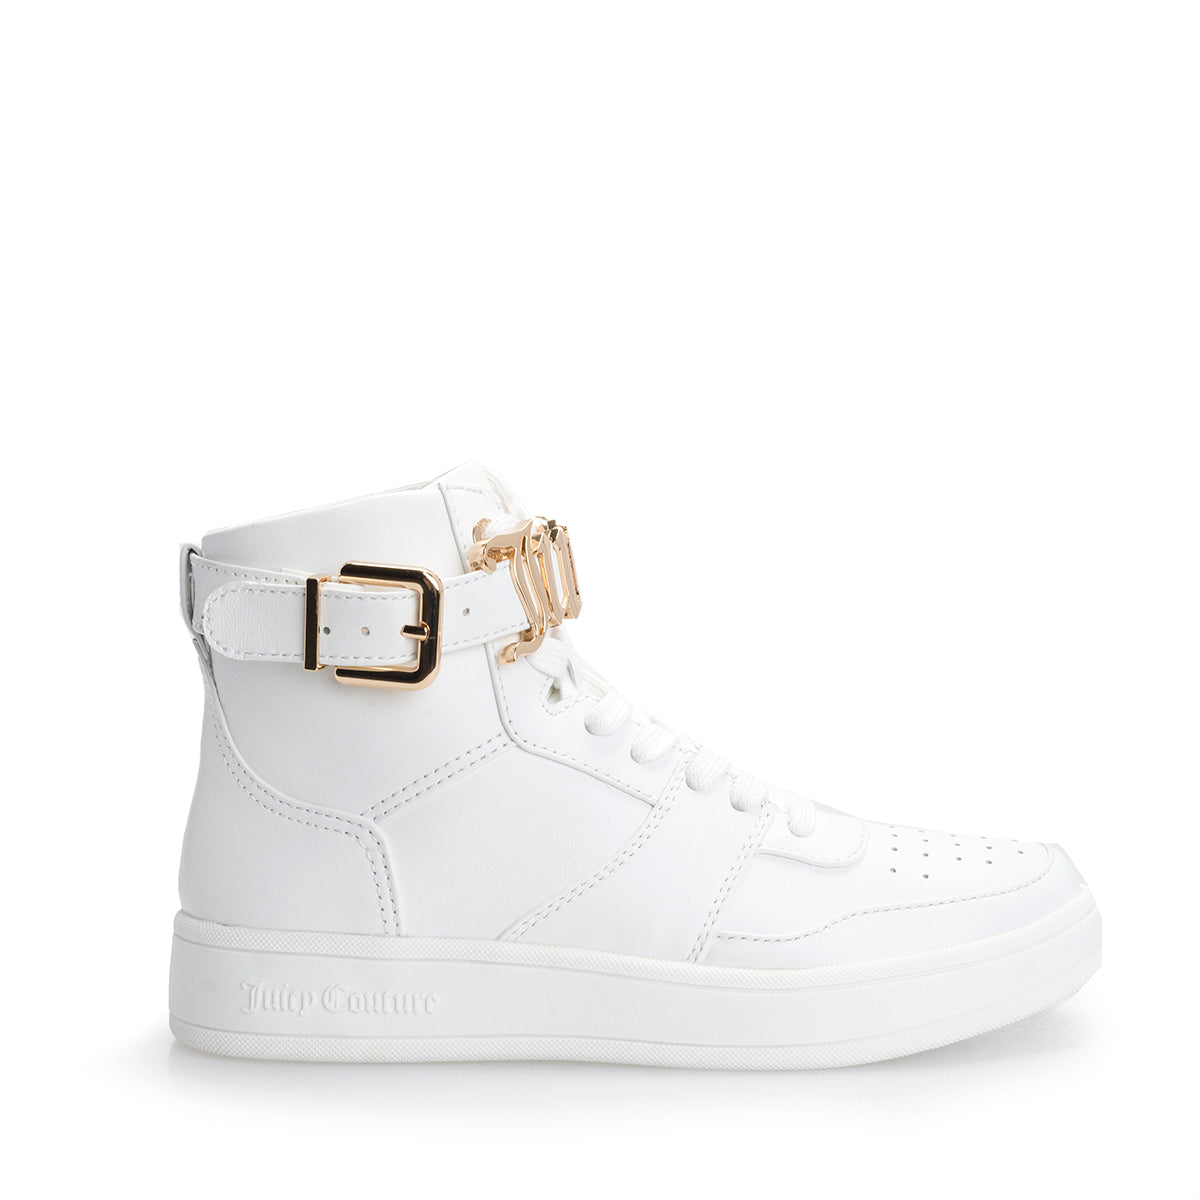 Share 219+ juicy couture sneakers white latest